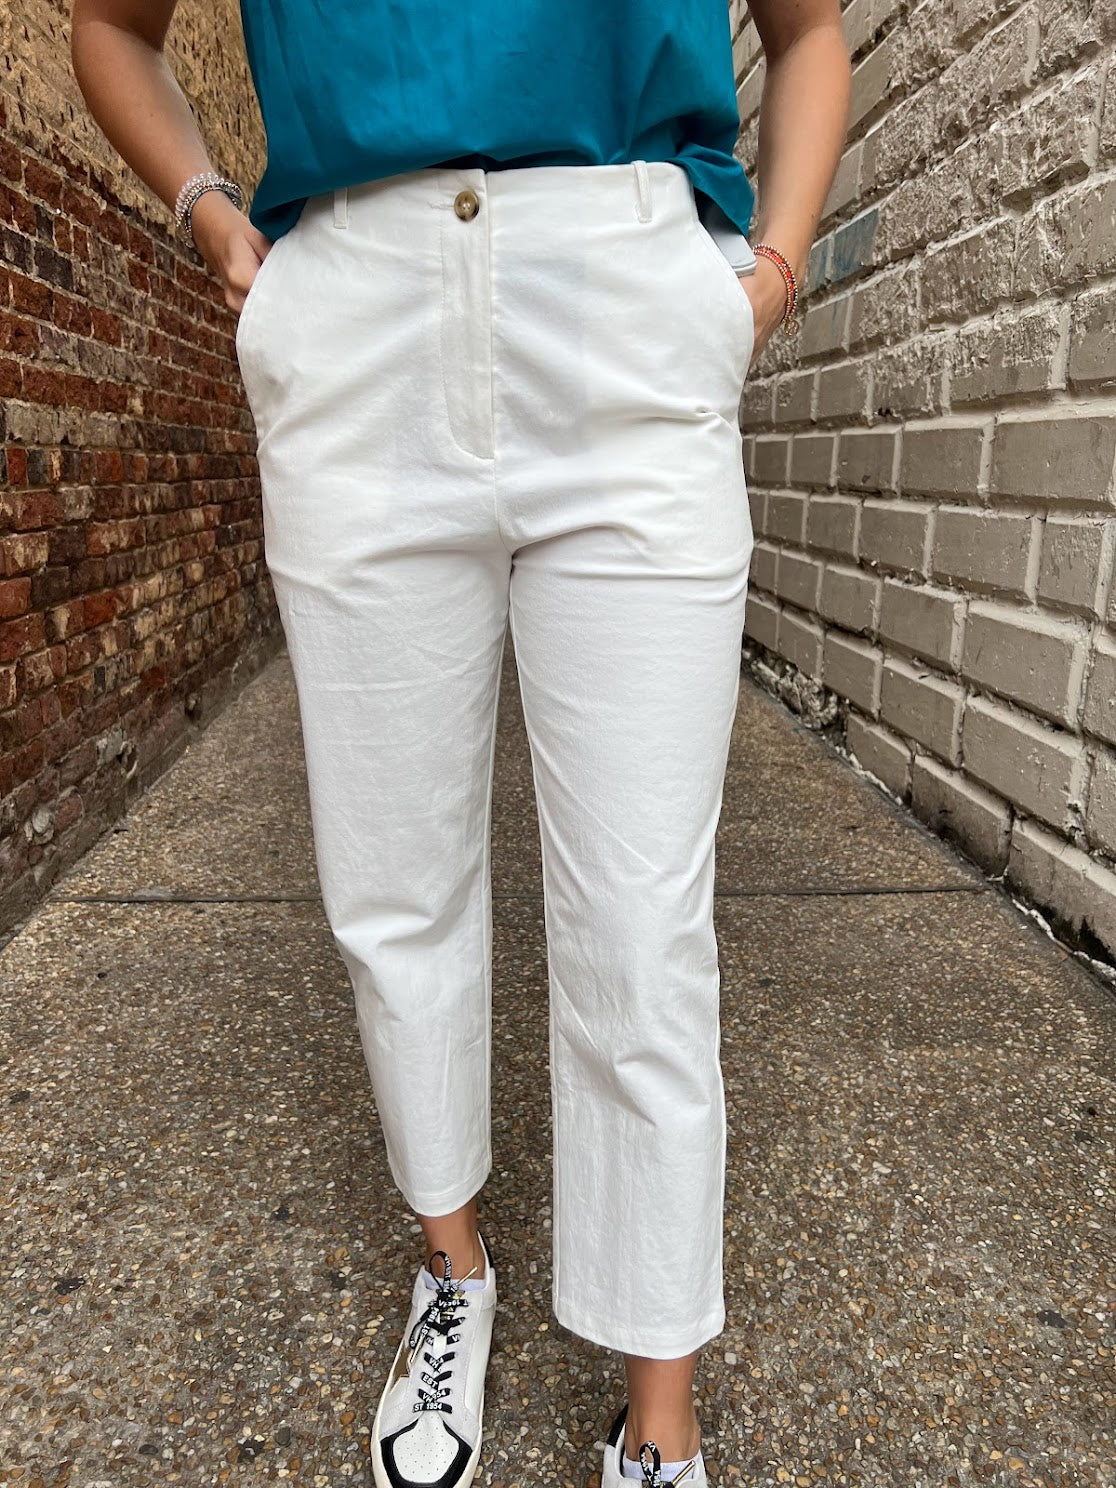 On The Move Tapered Pant Pants in White at Wrapsody